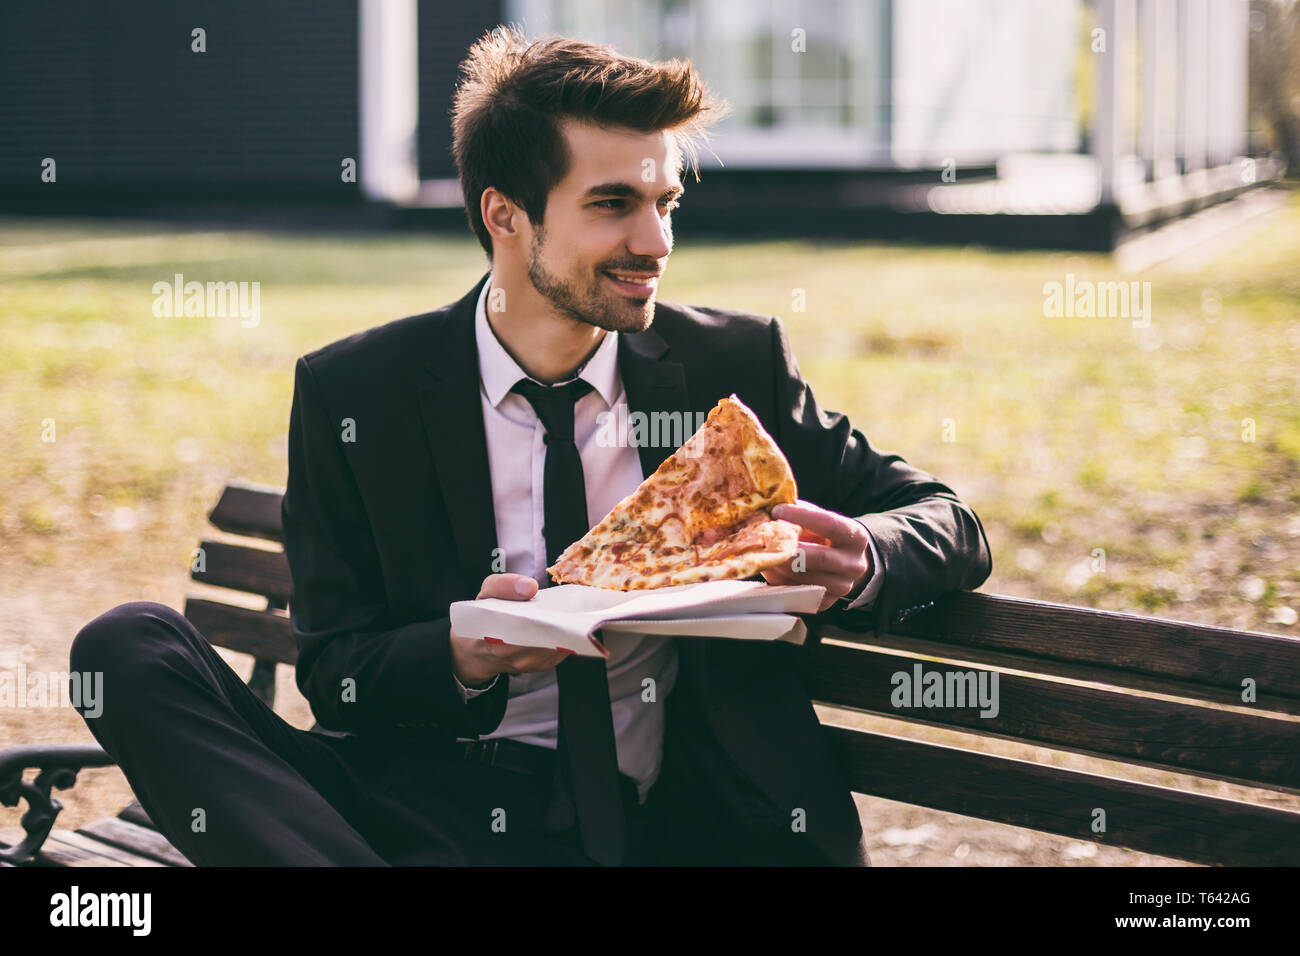 Elegant businessman enjoys eating pizza on his lunch break while sitting outdoor.Toned image. Stock Photo